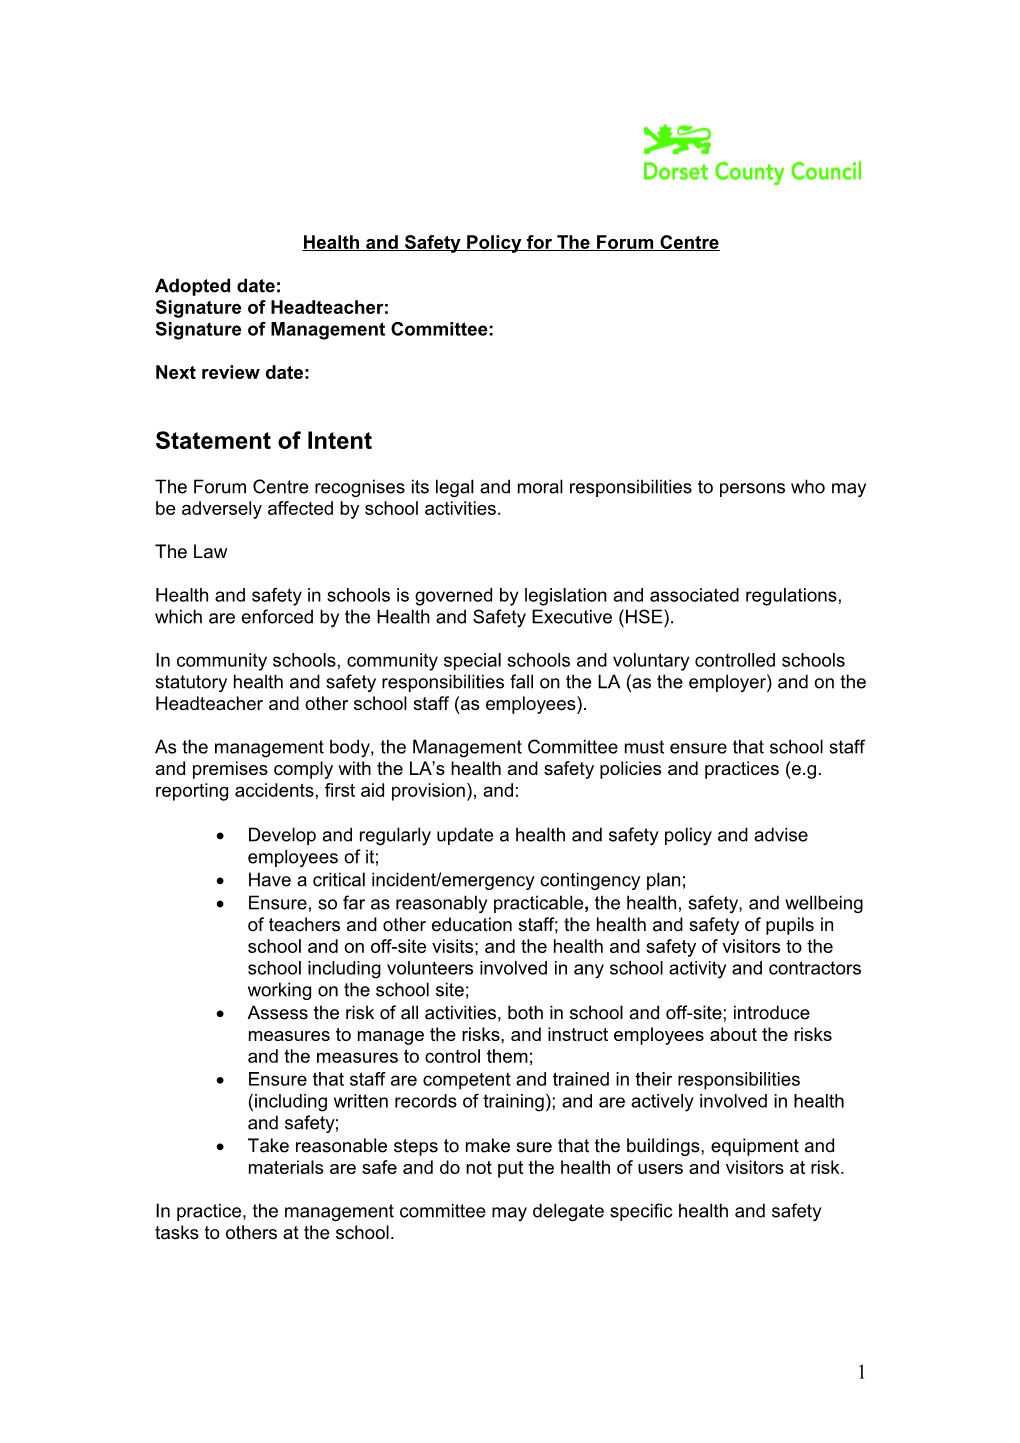 Health and Safety Policy for the Forum Centre